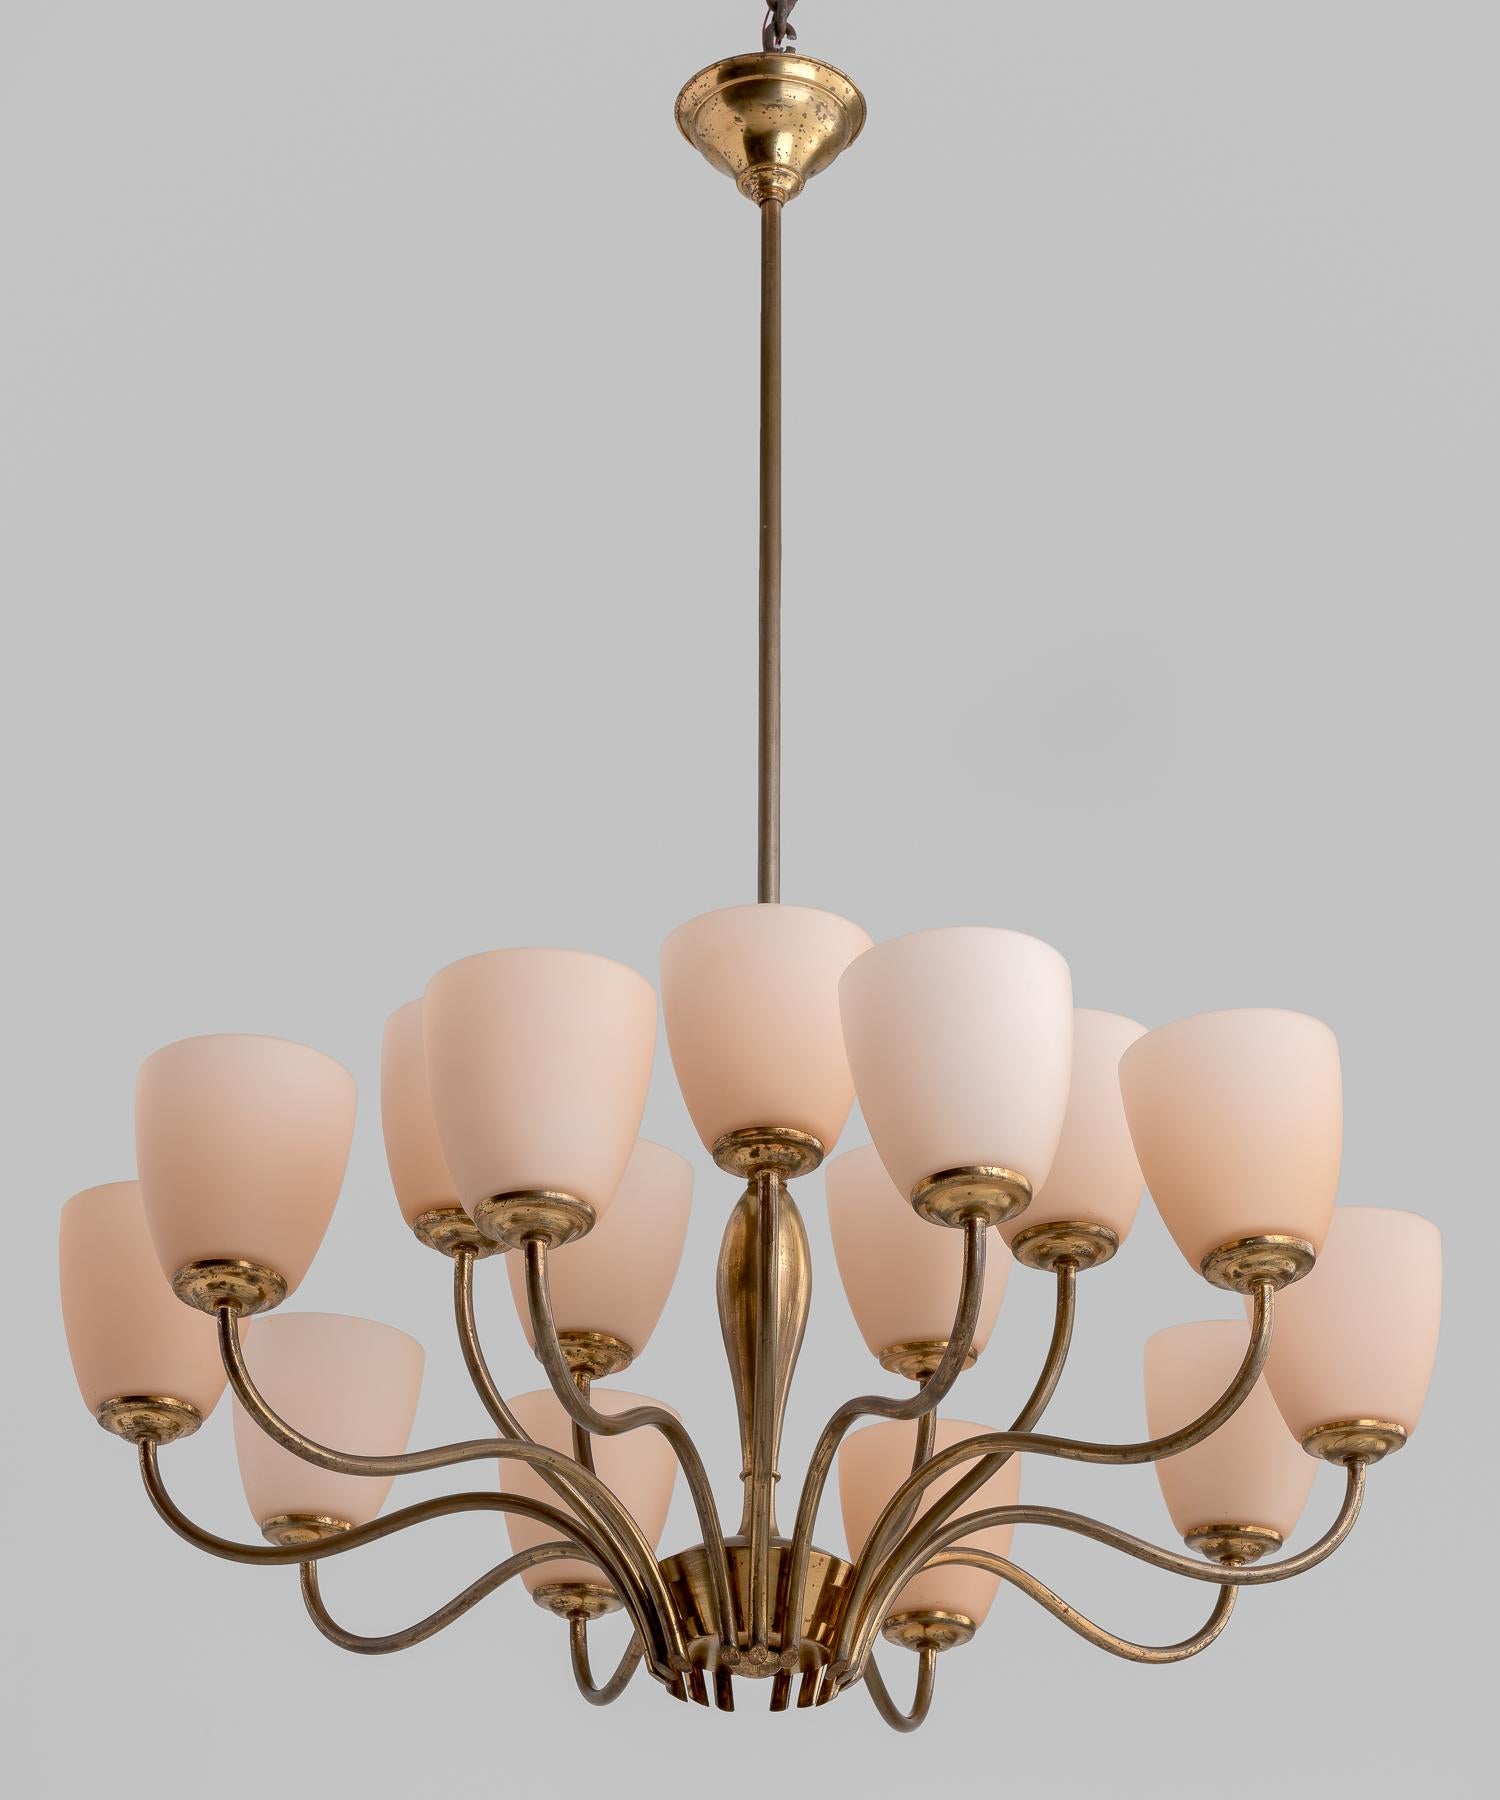 15-Arm Brass Chandelier, Italy, circa 1950

15 open-top glass shades on curved brass arms.

32